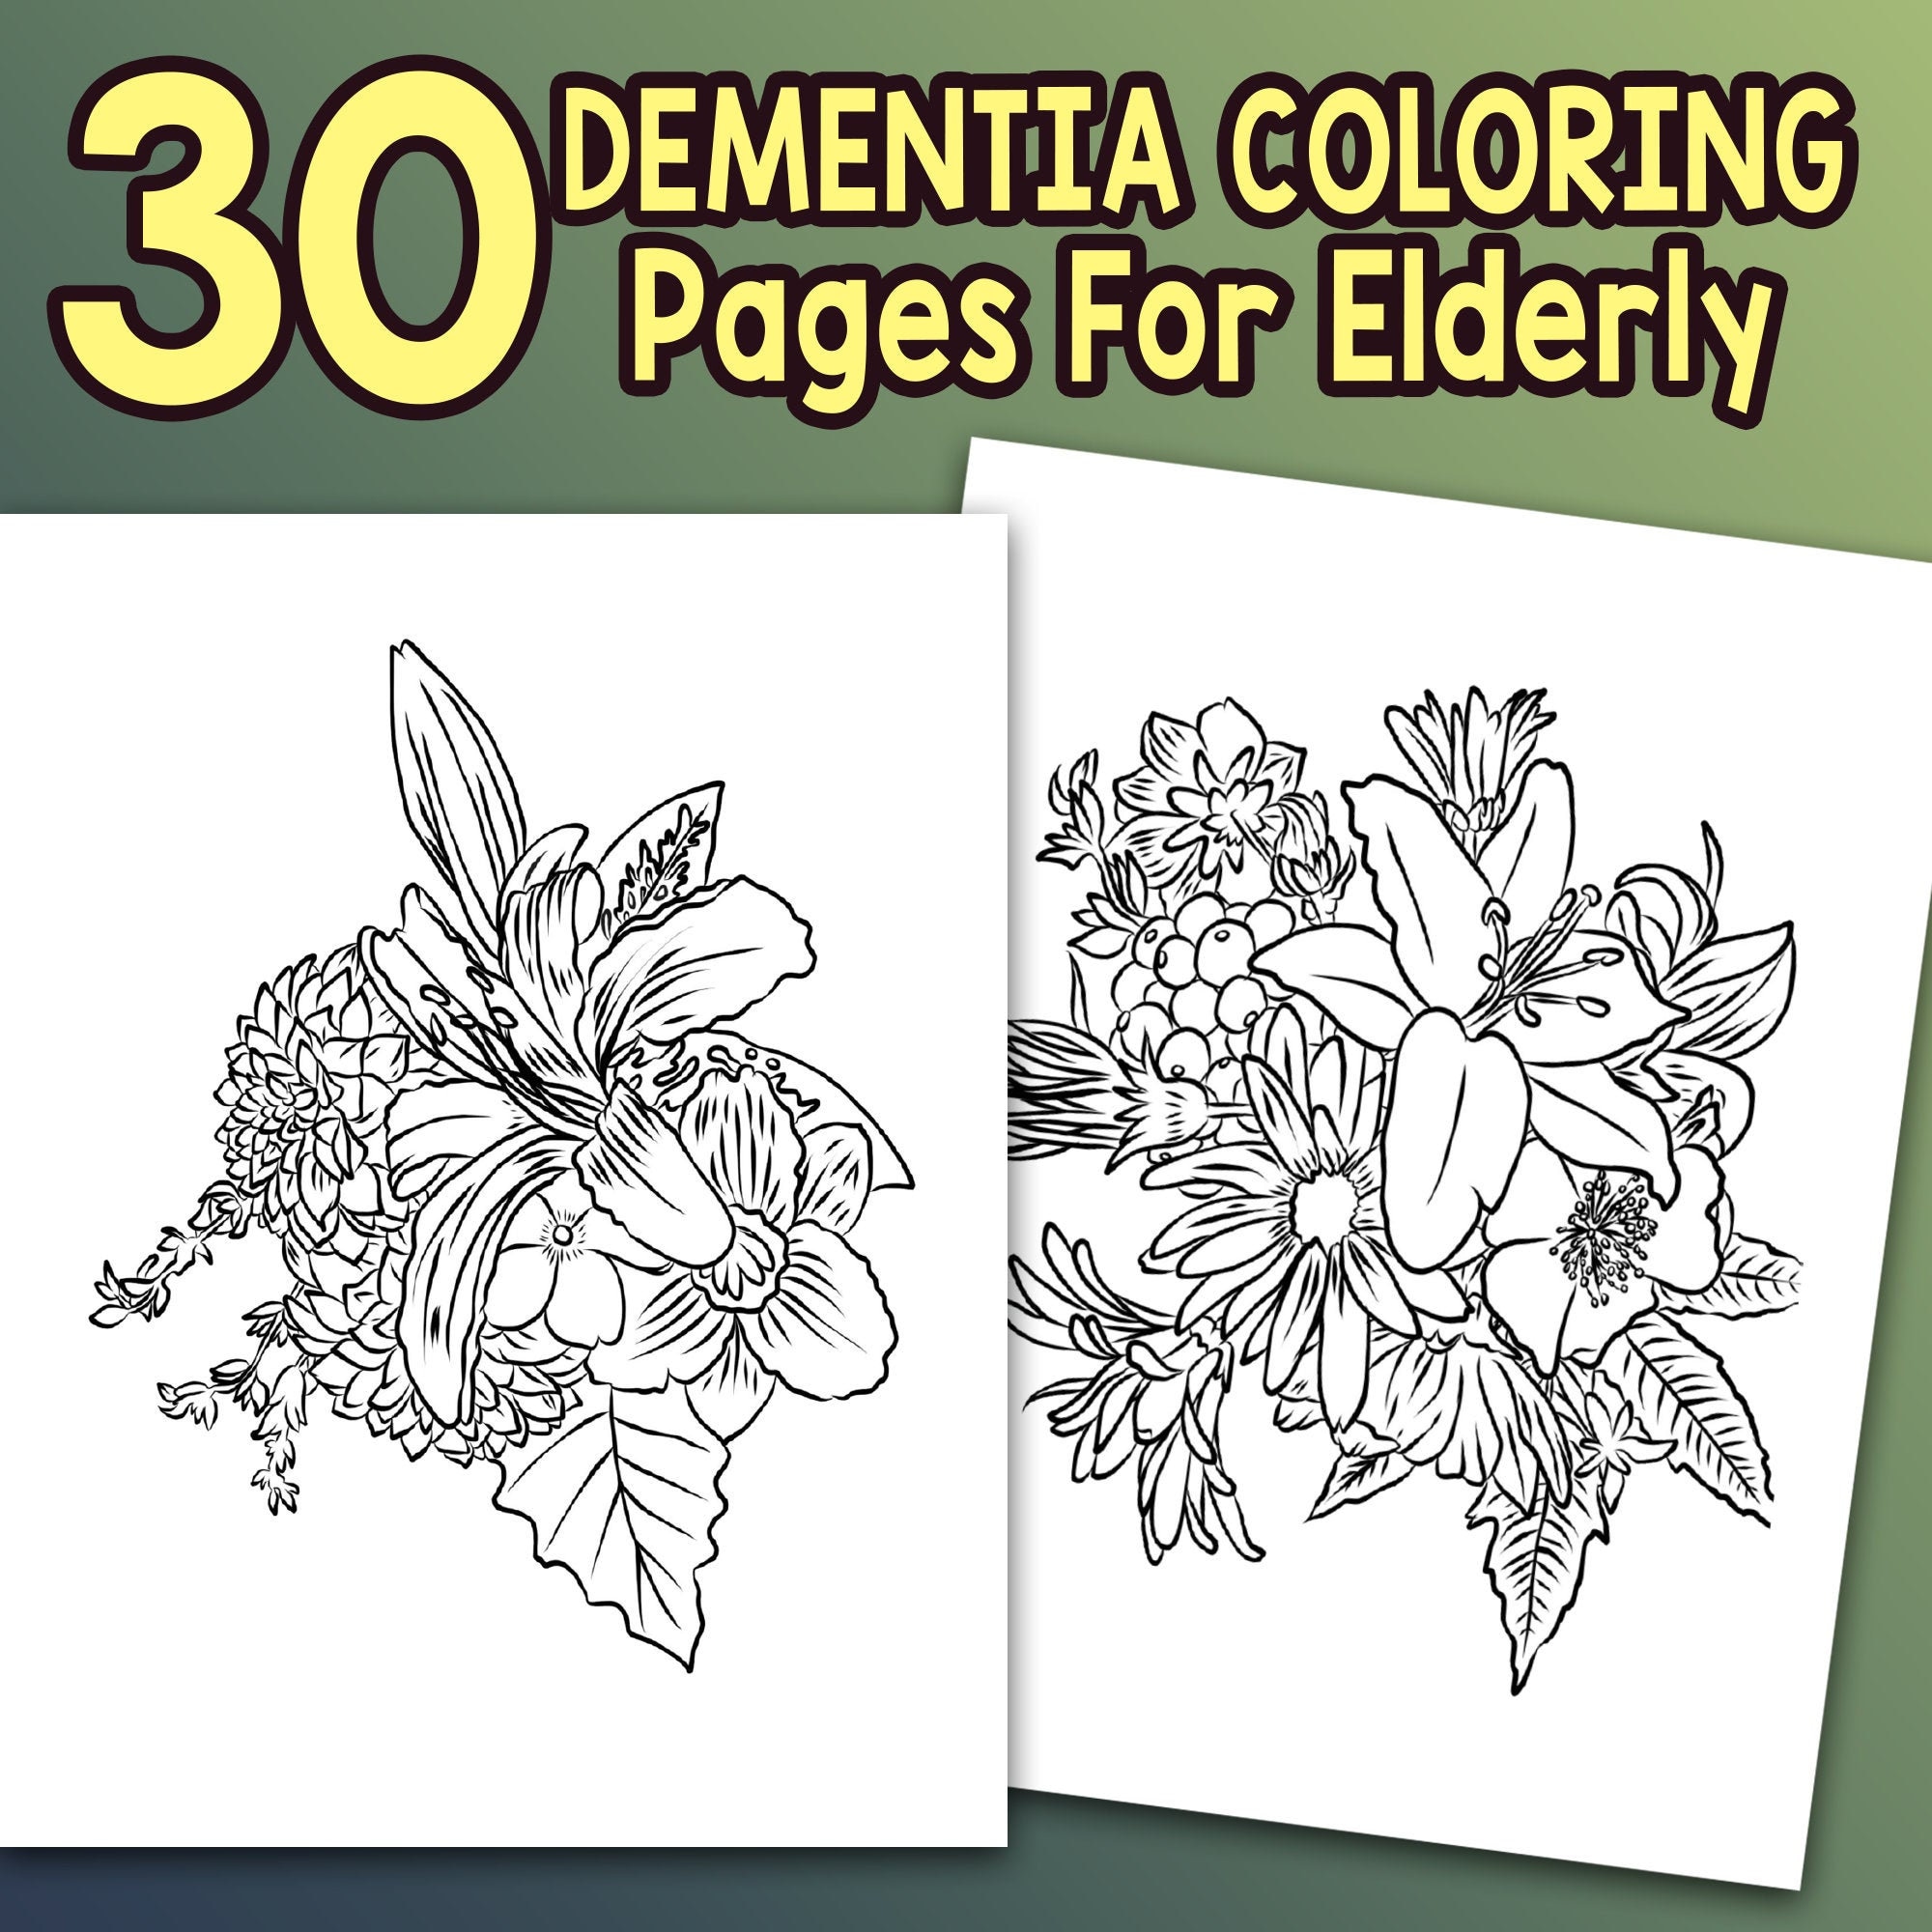 Best value dementia coloring books for elderly instant download large print pages cognitive activity for seniors w spring garden more